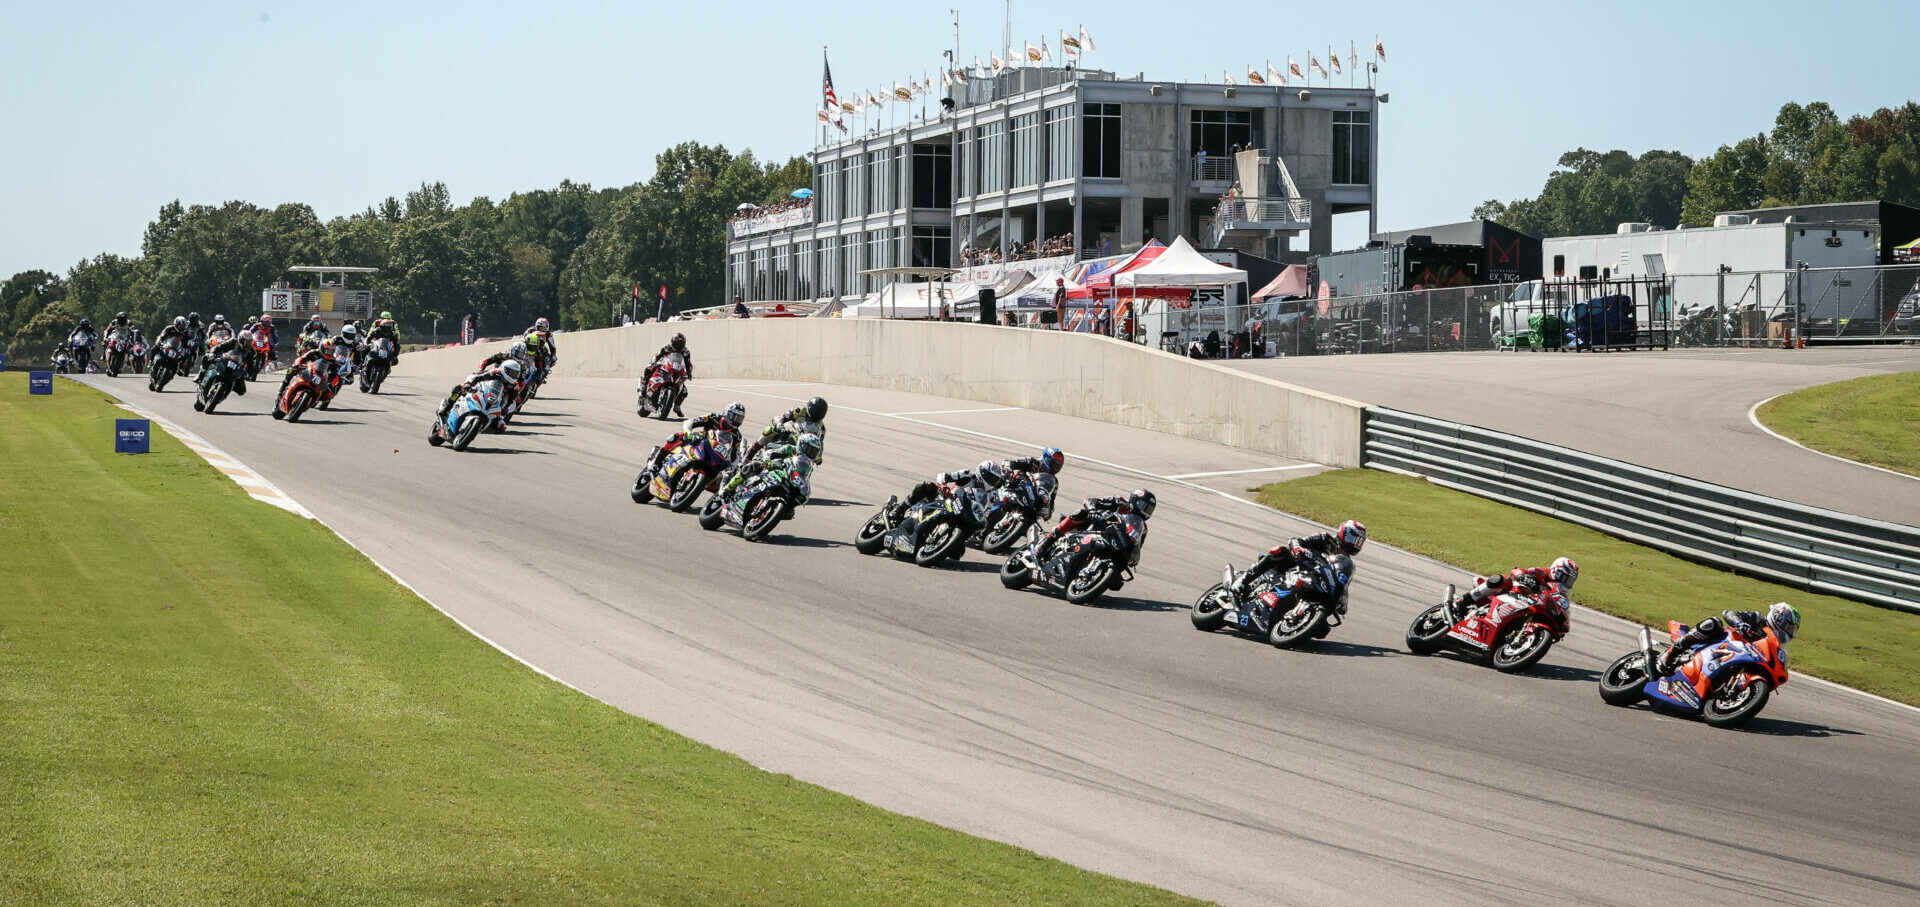 Hayden Gillim (far right) leads the start of the Stock 1000 race at Barber Motorsports Park. Photo by Brian J. Nelson.